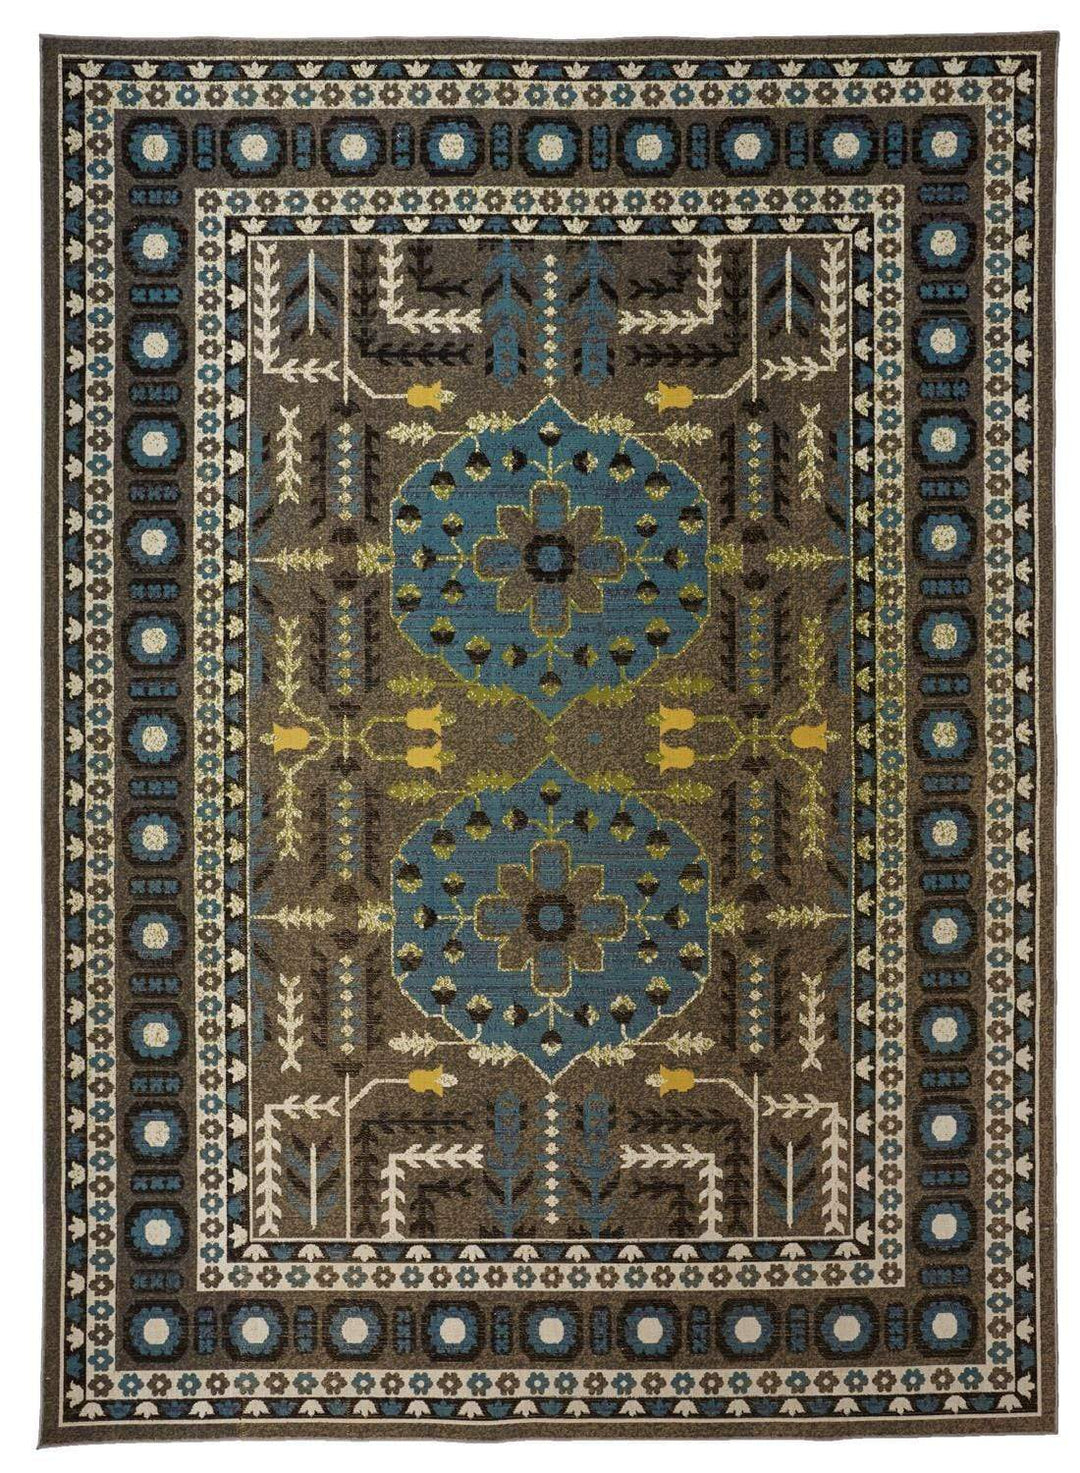 Feizy Feizy Foster Vinatge Style Kilim Rug - Dark Gray & Peacock Blue - Available in 7 Sizes 4'-3" x 6'-3" FST3754FGRYBLUC16